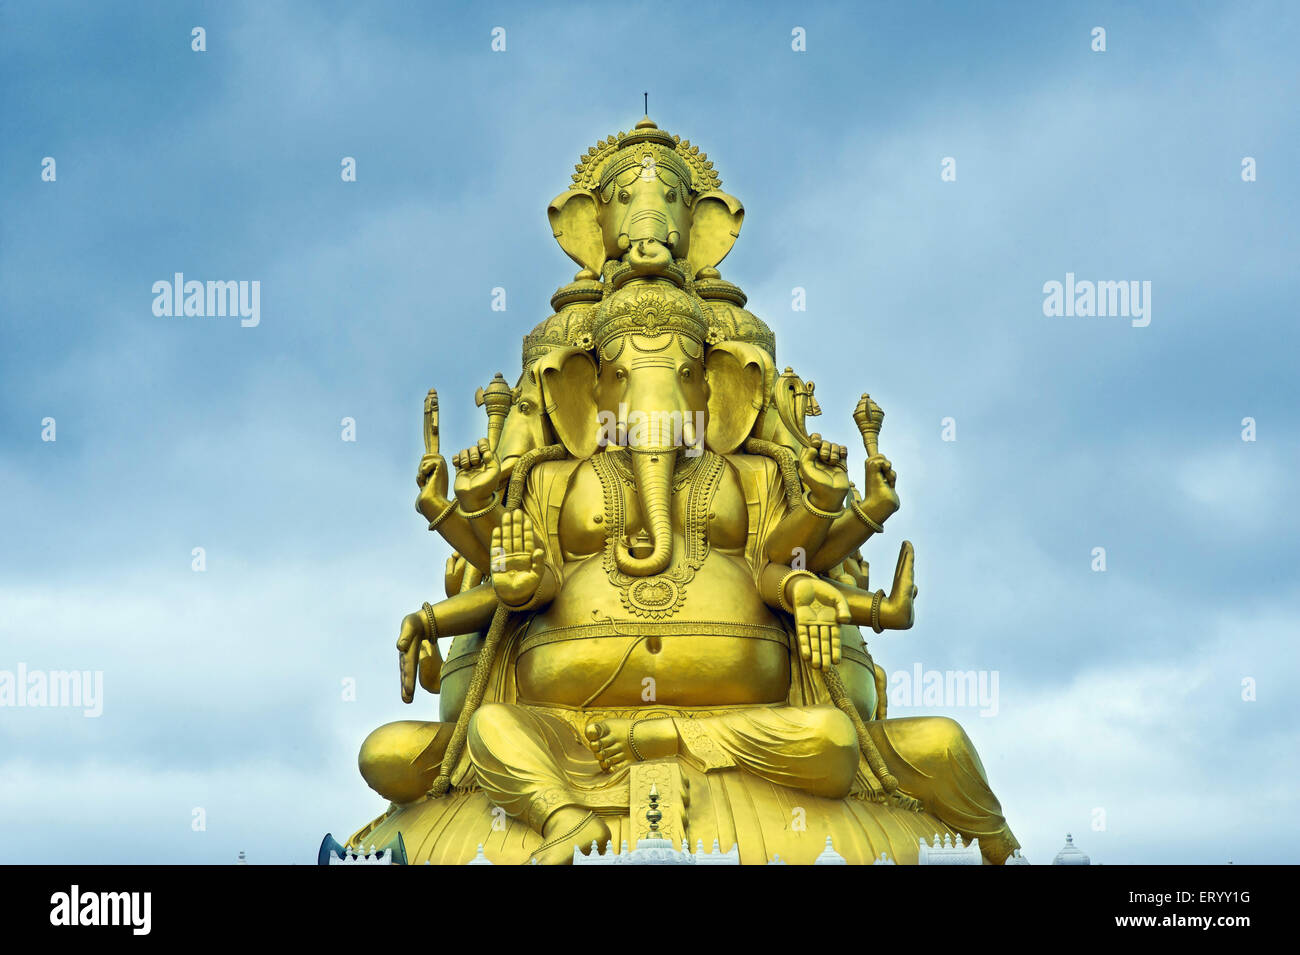 Lord ganesh with four heads in golden color ; Karnataka ; India Stock Photo